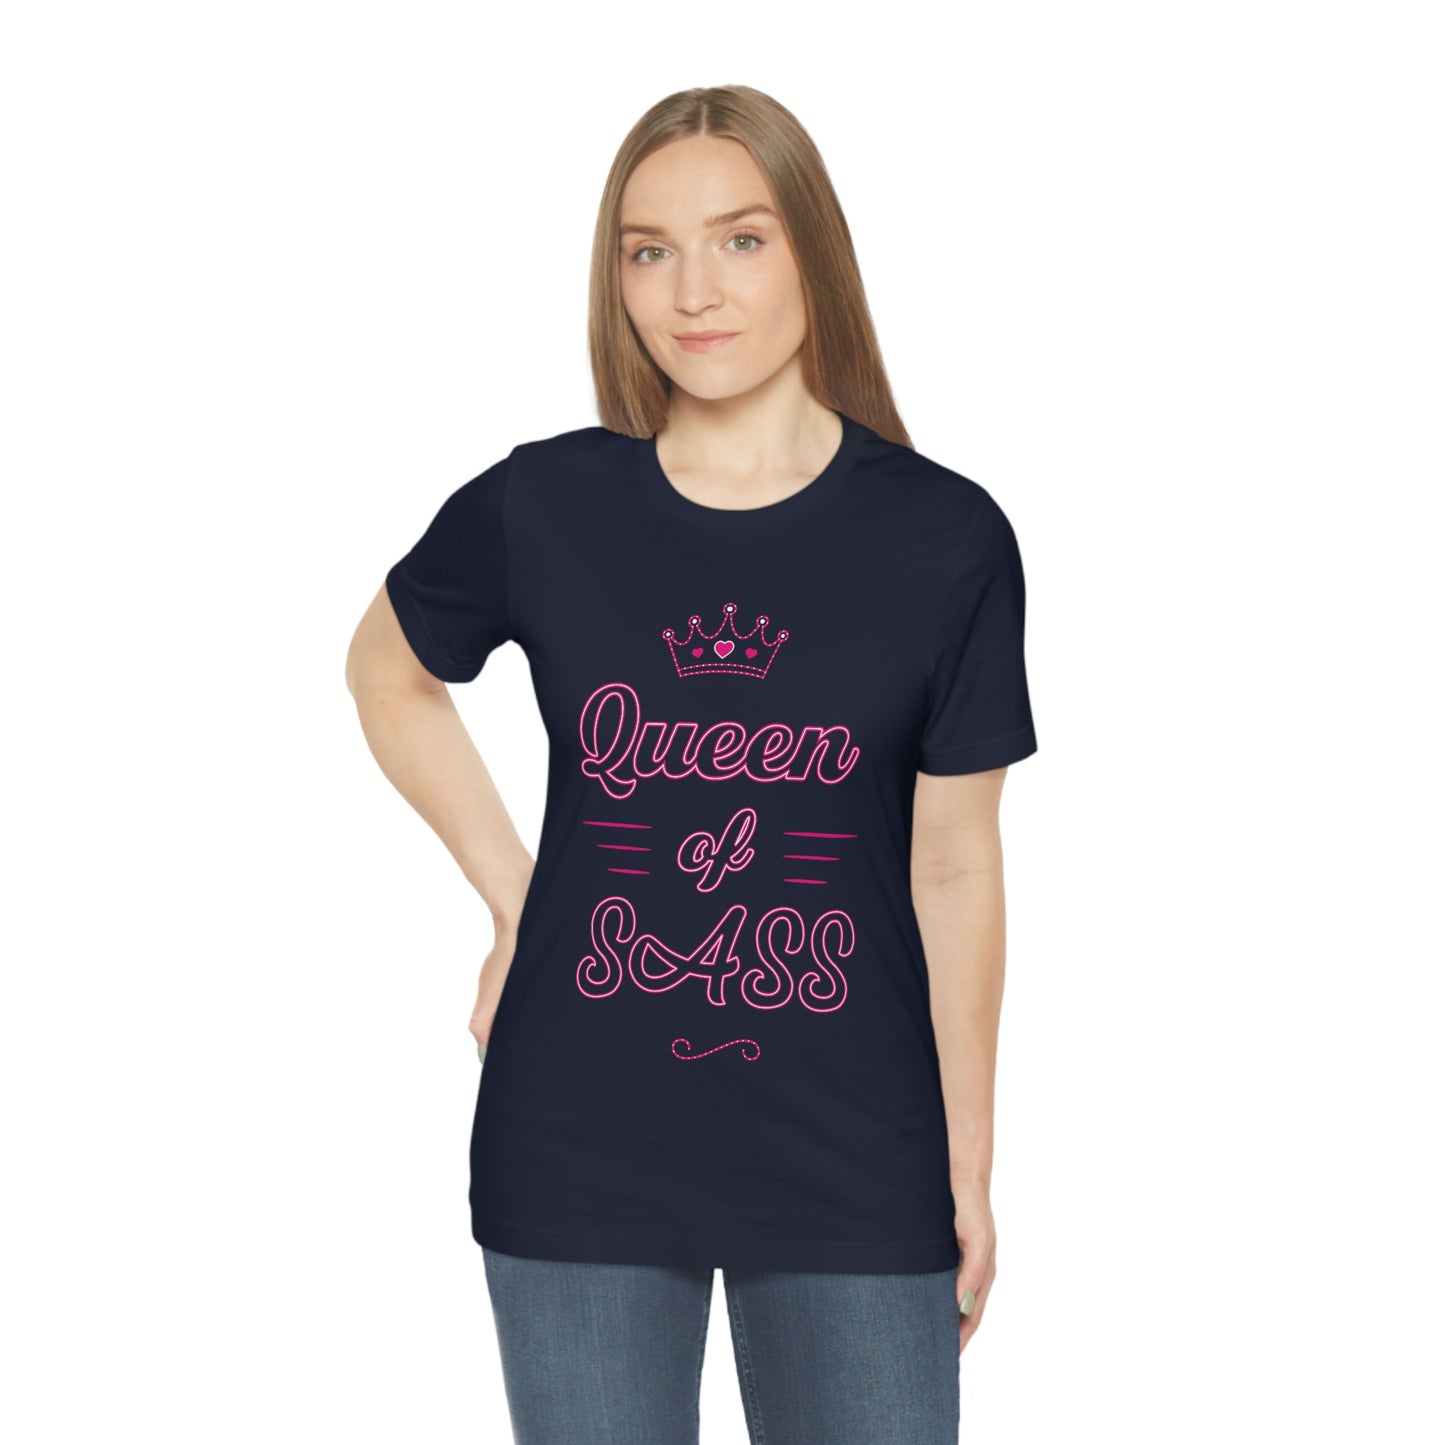 Navy T-Shirt with hot pink neon text saying 'Queen of Sass'. From the TEQNEON Word Craft collection